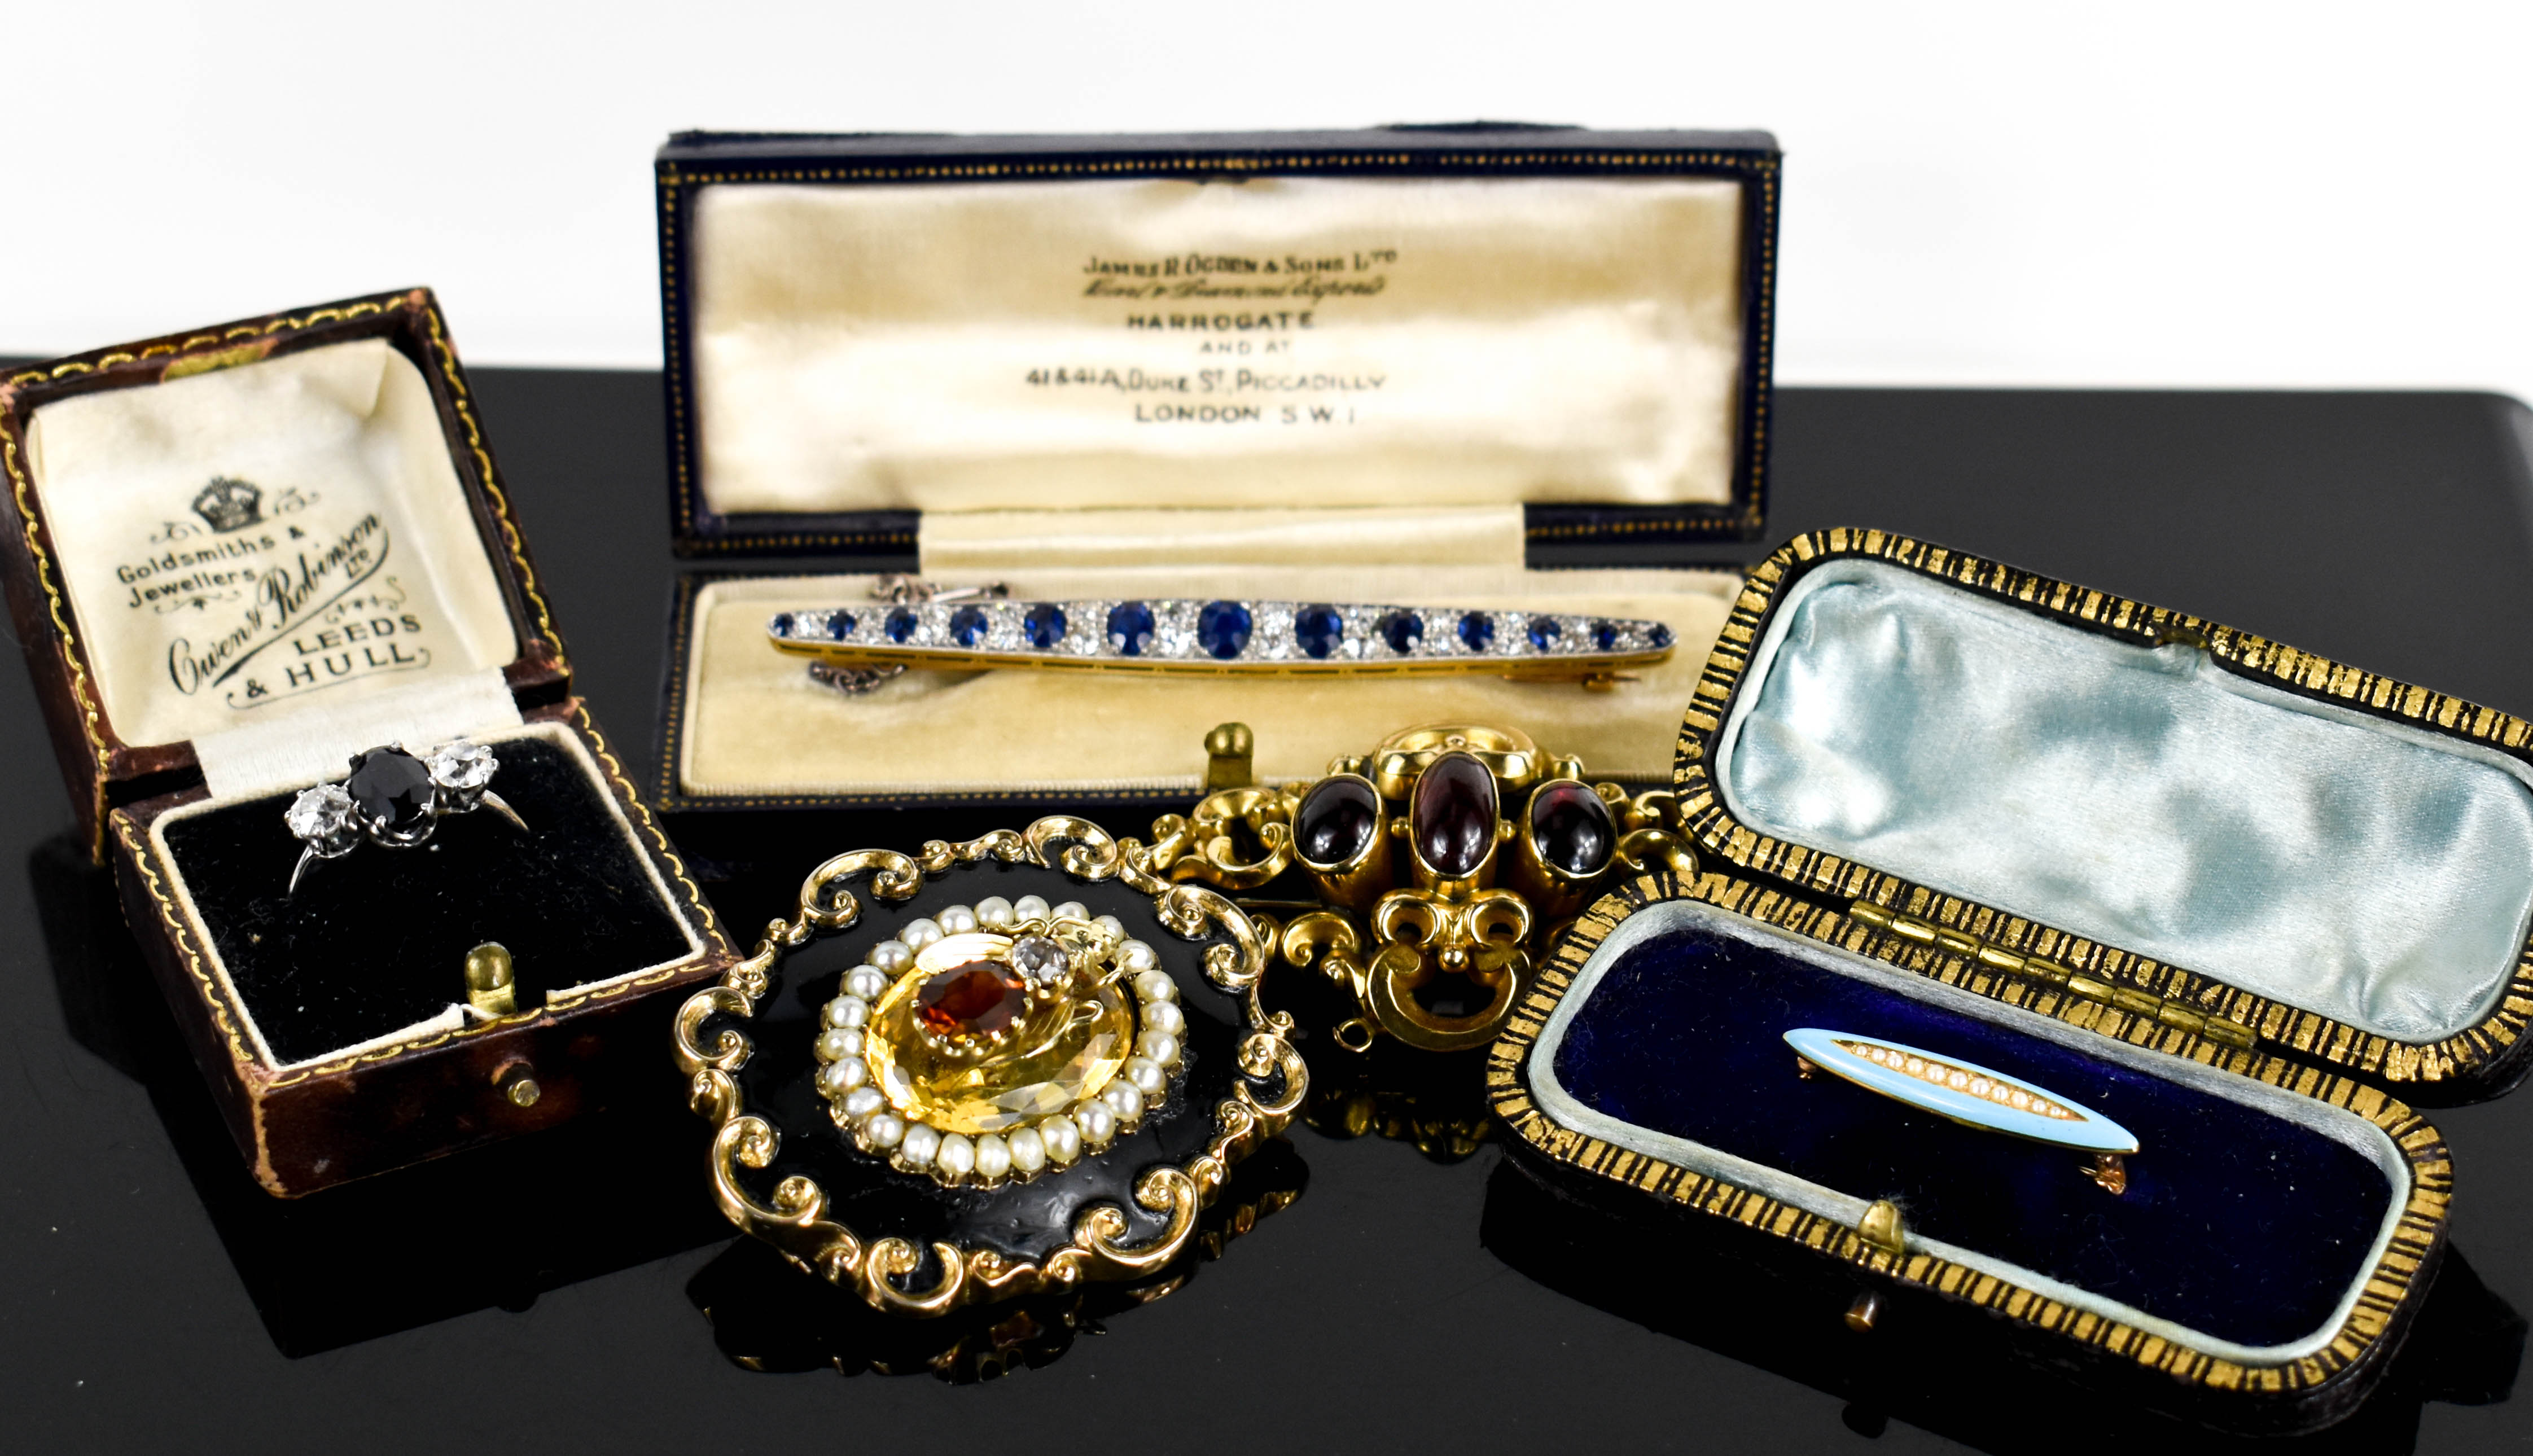 Specialist Jewellery & Silver, Watches, Coins & Objet D'art